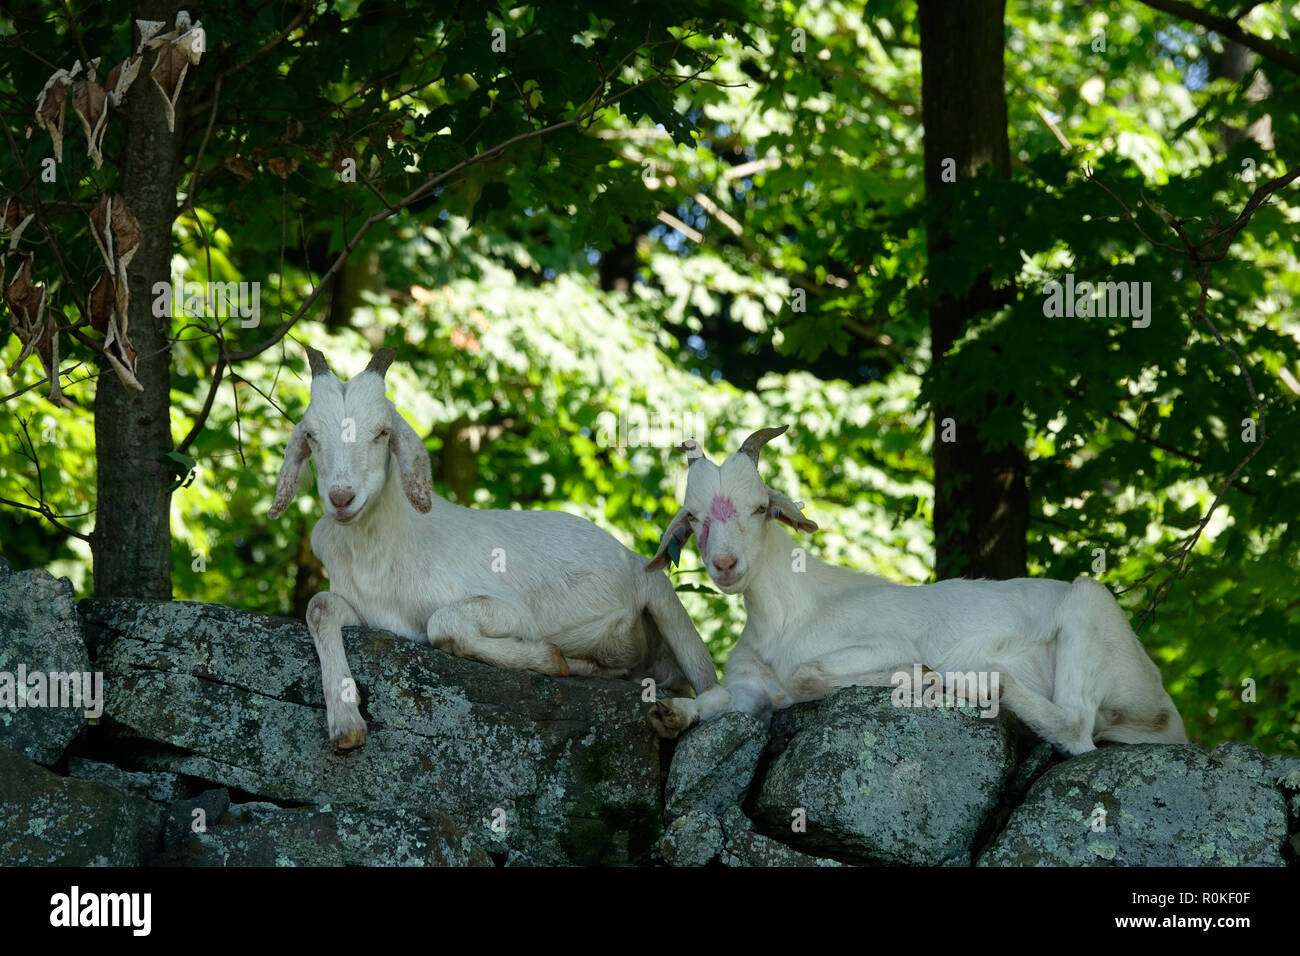 Two White Goats Relaxing on a Wall of Rocks in the Woods Stock Photo